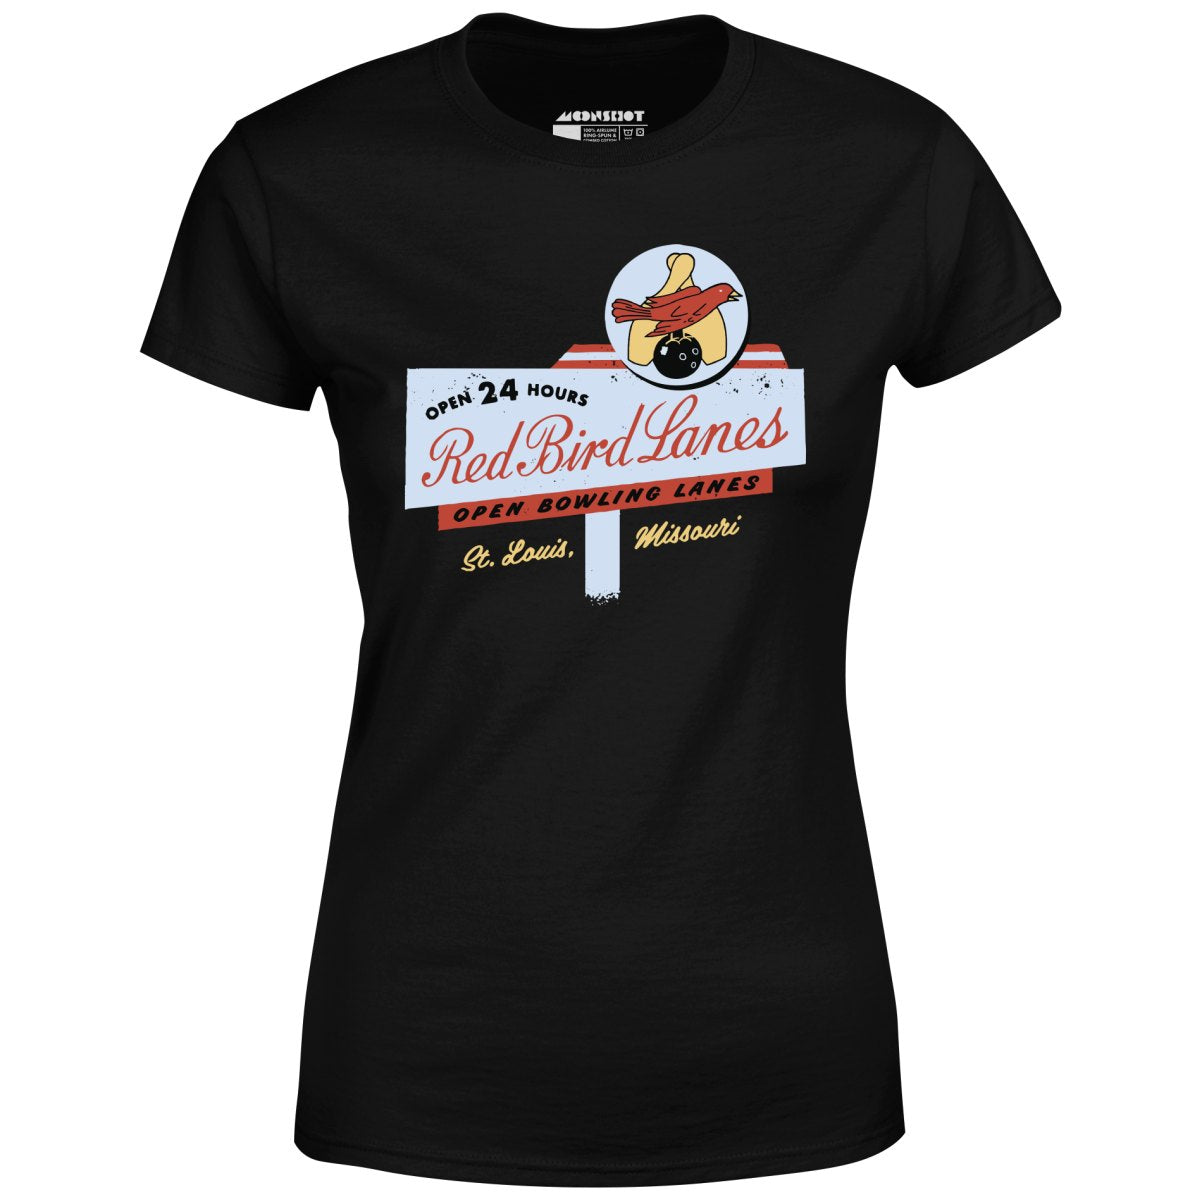 Red Bird Lanes v2 - St. Louis, MO - Vintage Bowling Alley - Women's T ...